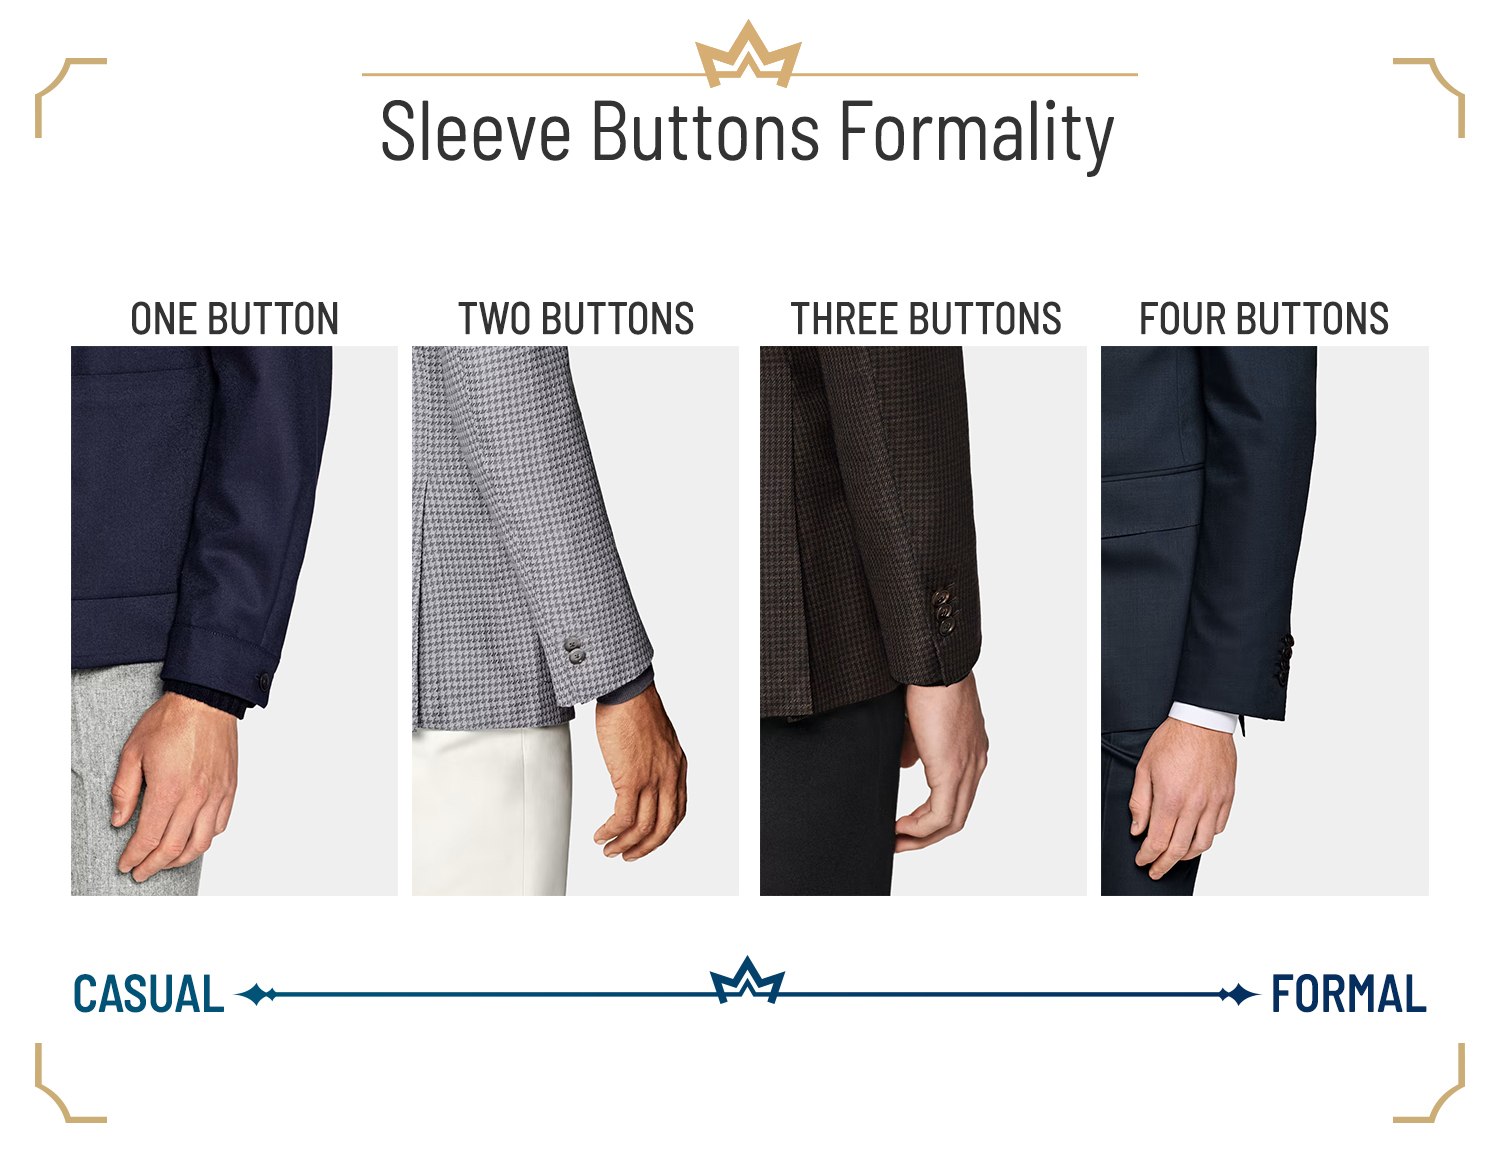 Different suit jacket sleeve buttons number and formality scale